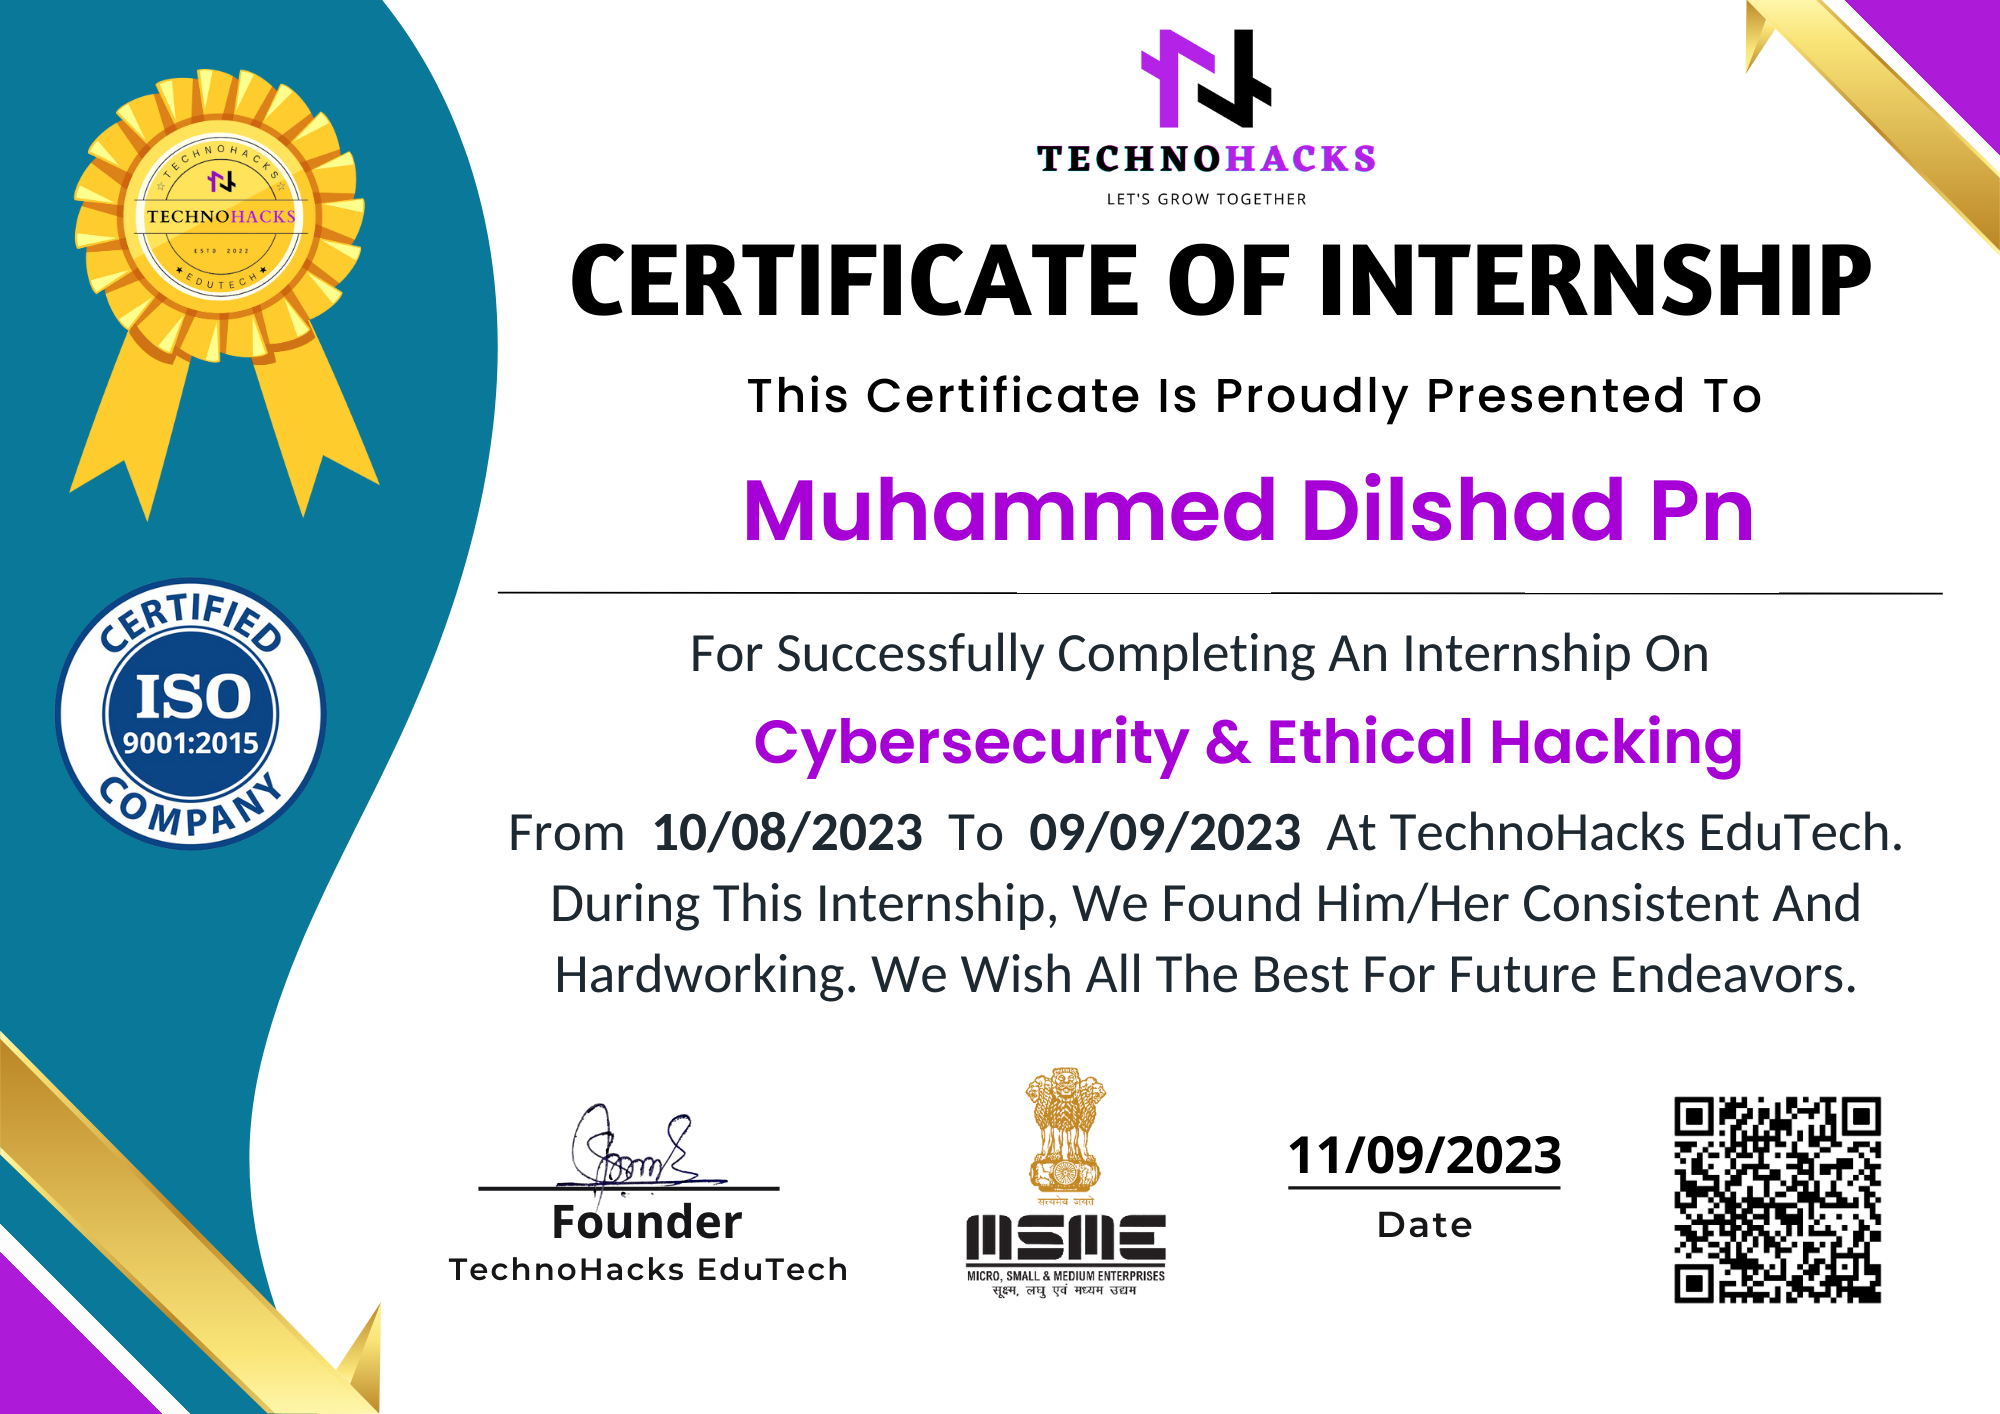 FQN
CN N

CERTIFICATE OF INTERNSHIP

This Certificate Is Proudly Presented To

Muhammed Dilshad Pn

-_ For Successfully Completing An Internship On
SED) Cybersecurity &amp; Ethical Hacking

c Q
OMPAY, From 10/08/2023 To 09/09/2023 At TechnoHacks EduTech.
During This Internship, We Found Him/Her Consistent And
Hardworking. We Wish All The Best For Future Endeavors.

 

 

